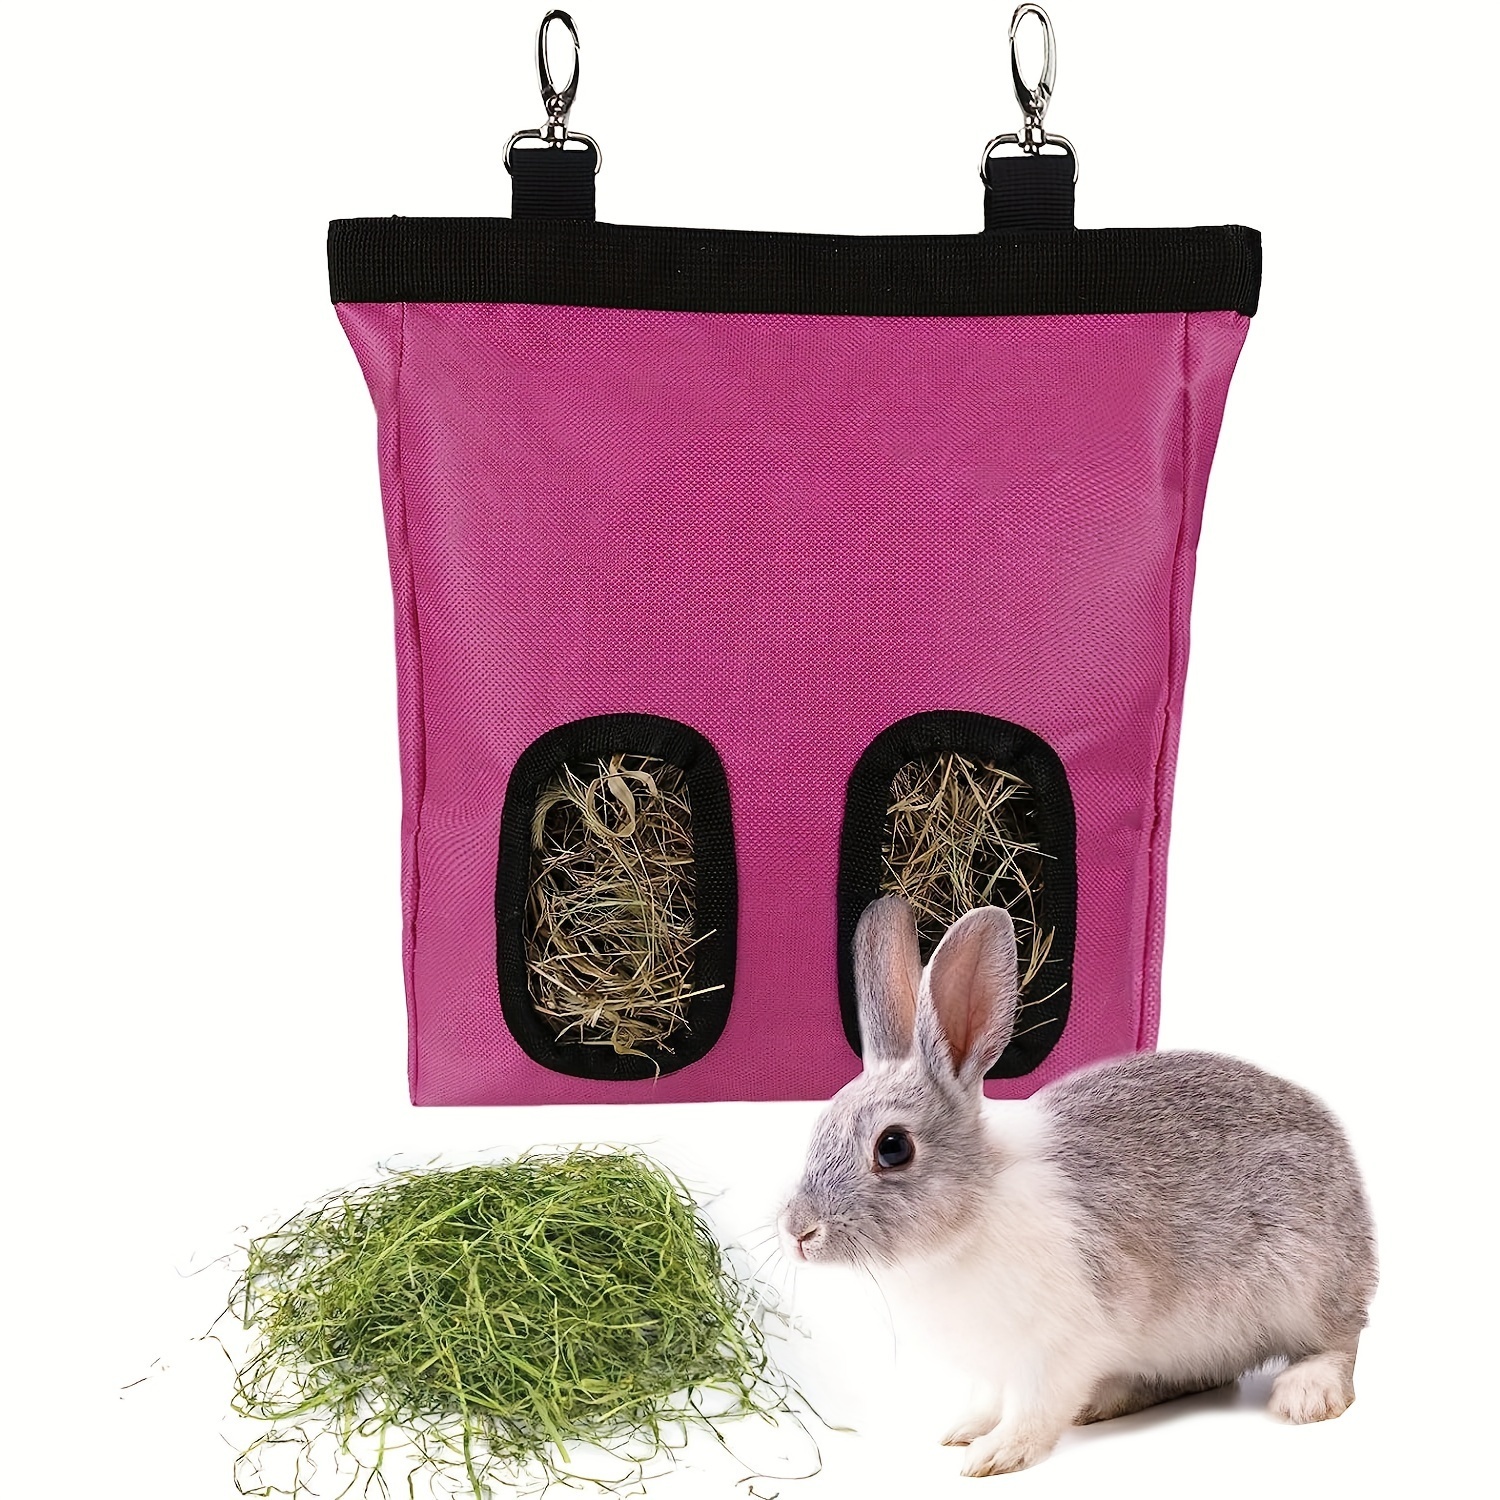 

Keep Your Pet's Food Fresh And Accessible With This Guinea Pig Oxford Food Storage Bag!